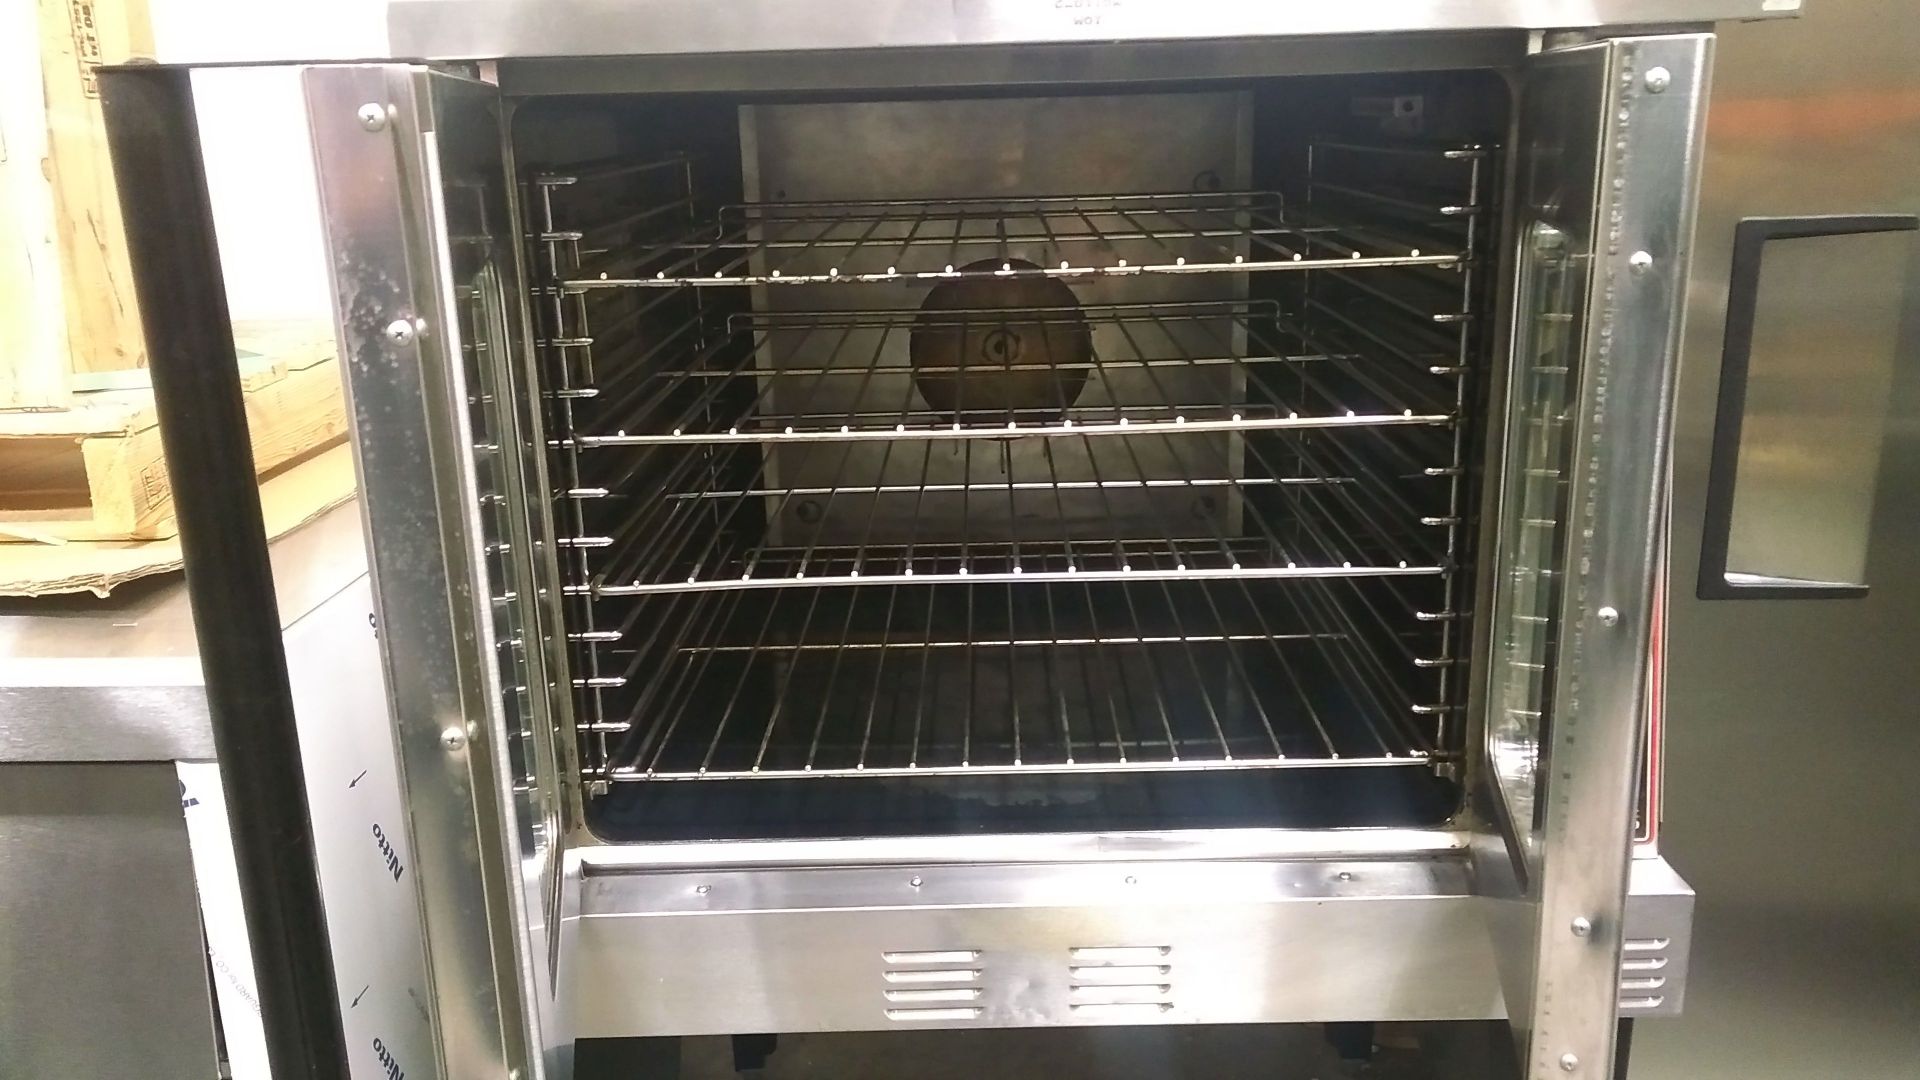 Garland Master 450 Electric Convection Oven - Image 2 of 3